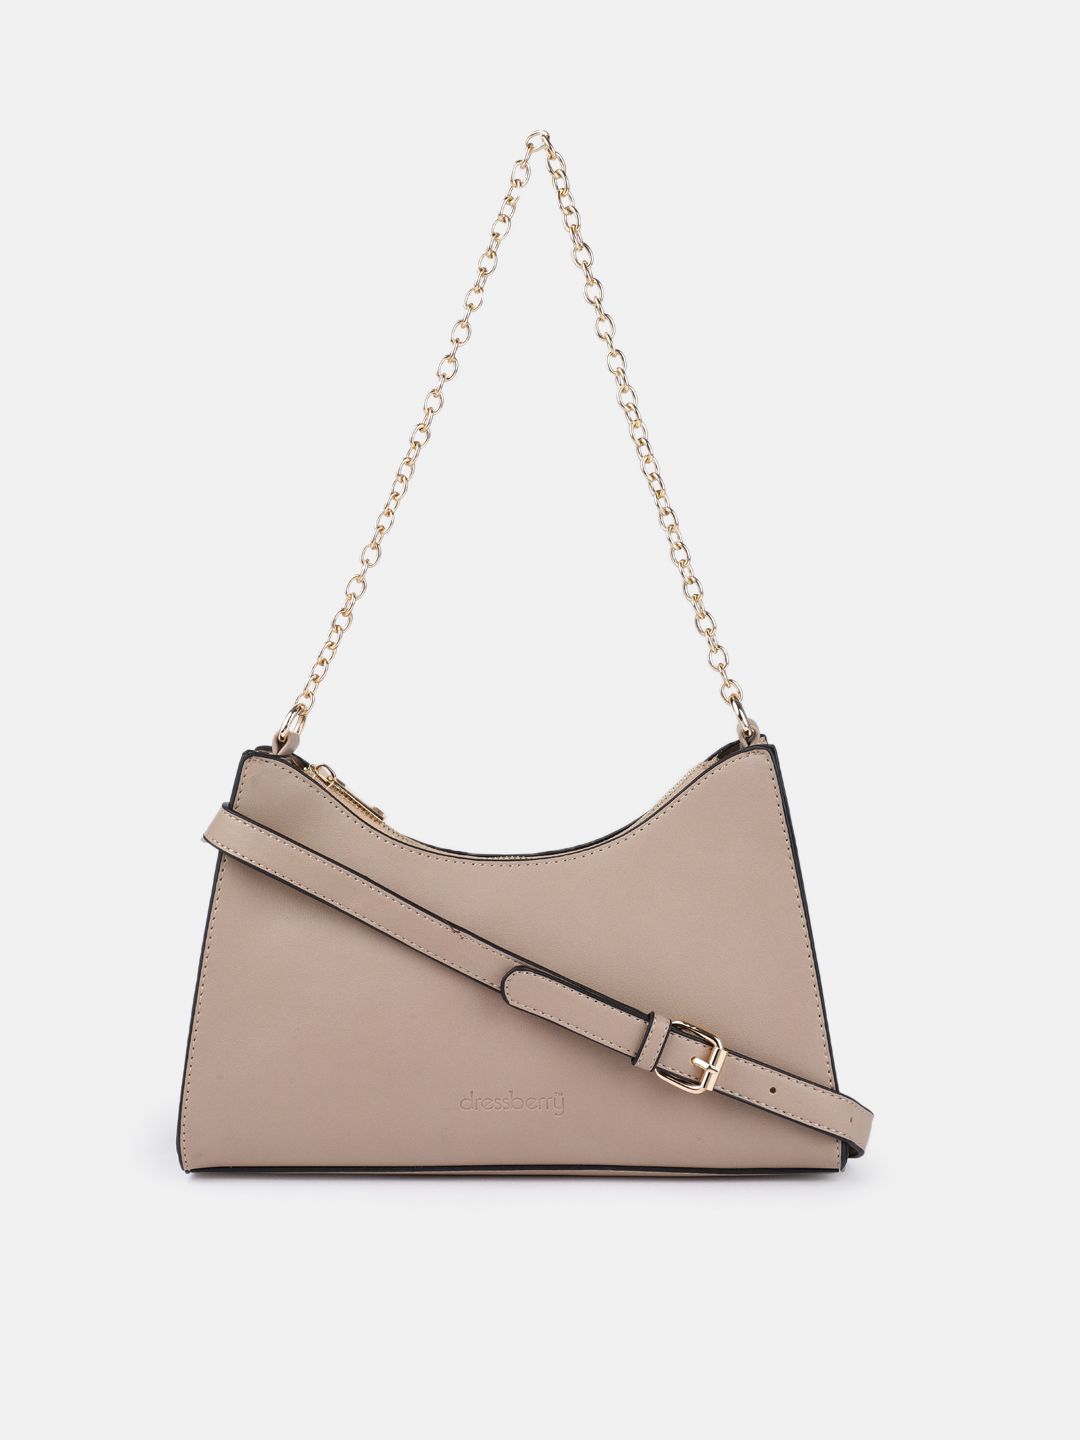 DressBerry Beige Structured Hobo Bag Price in India